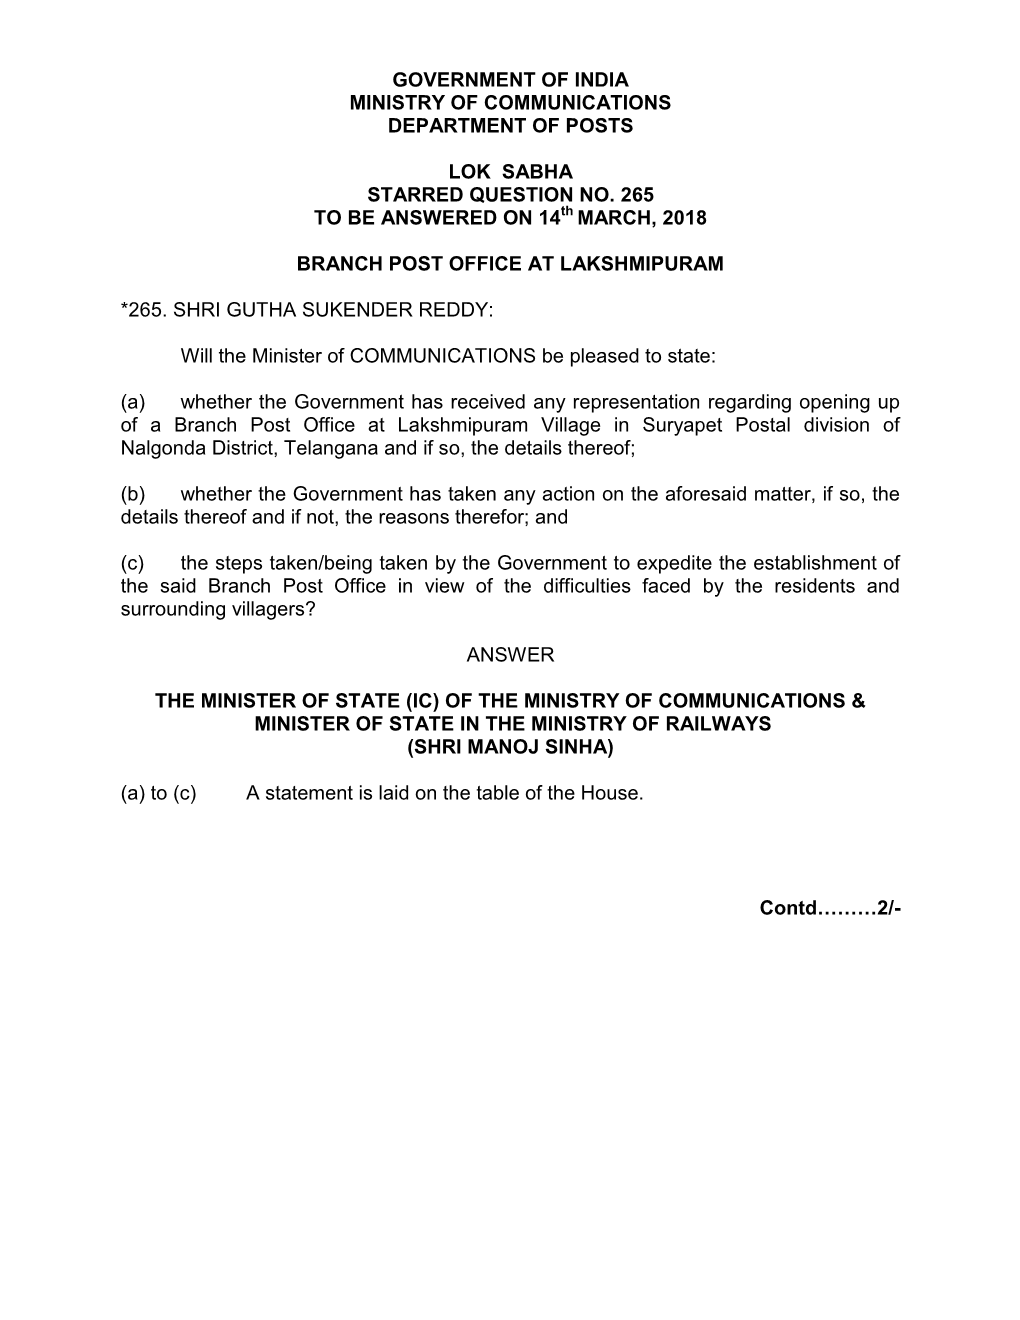 Government of India Ministry of Communications Department of Posts